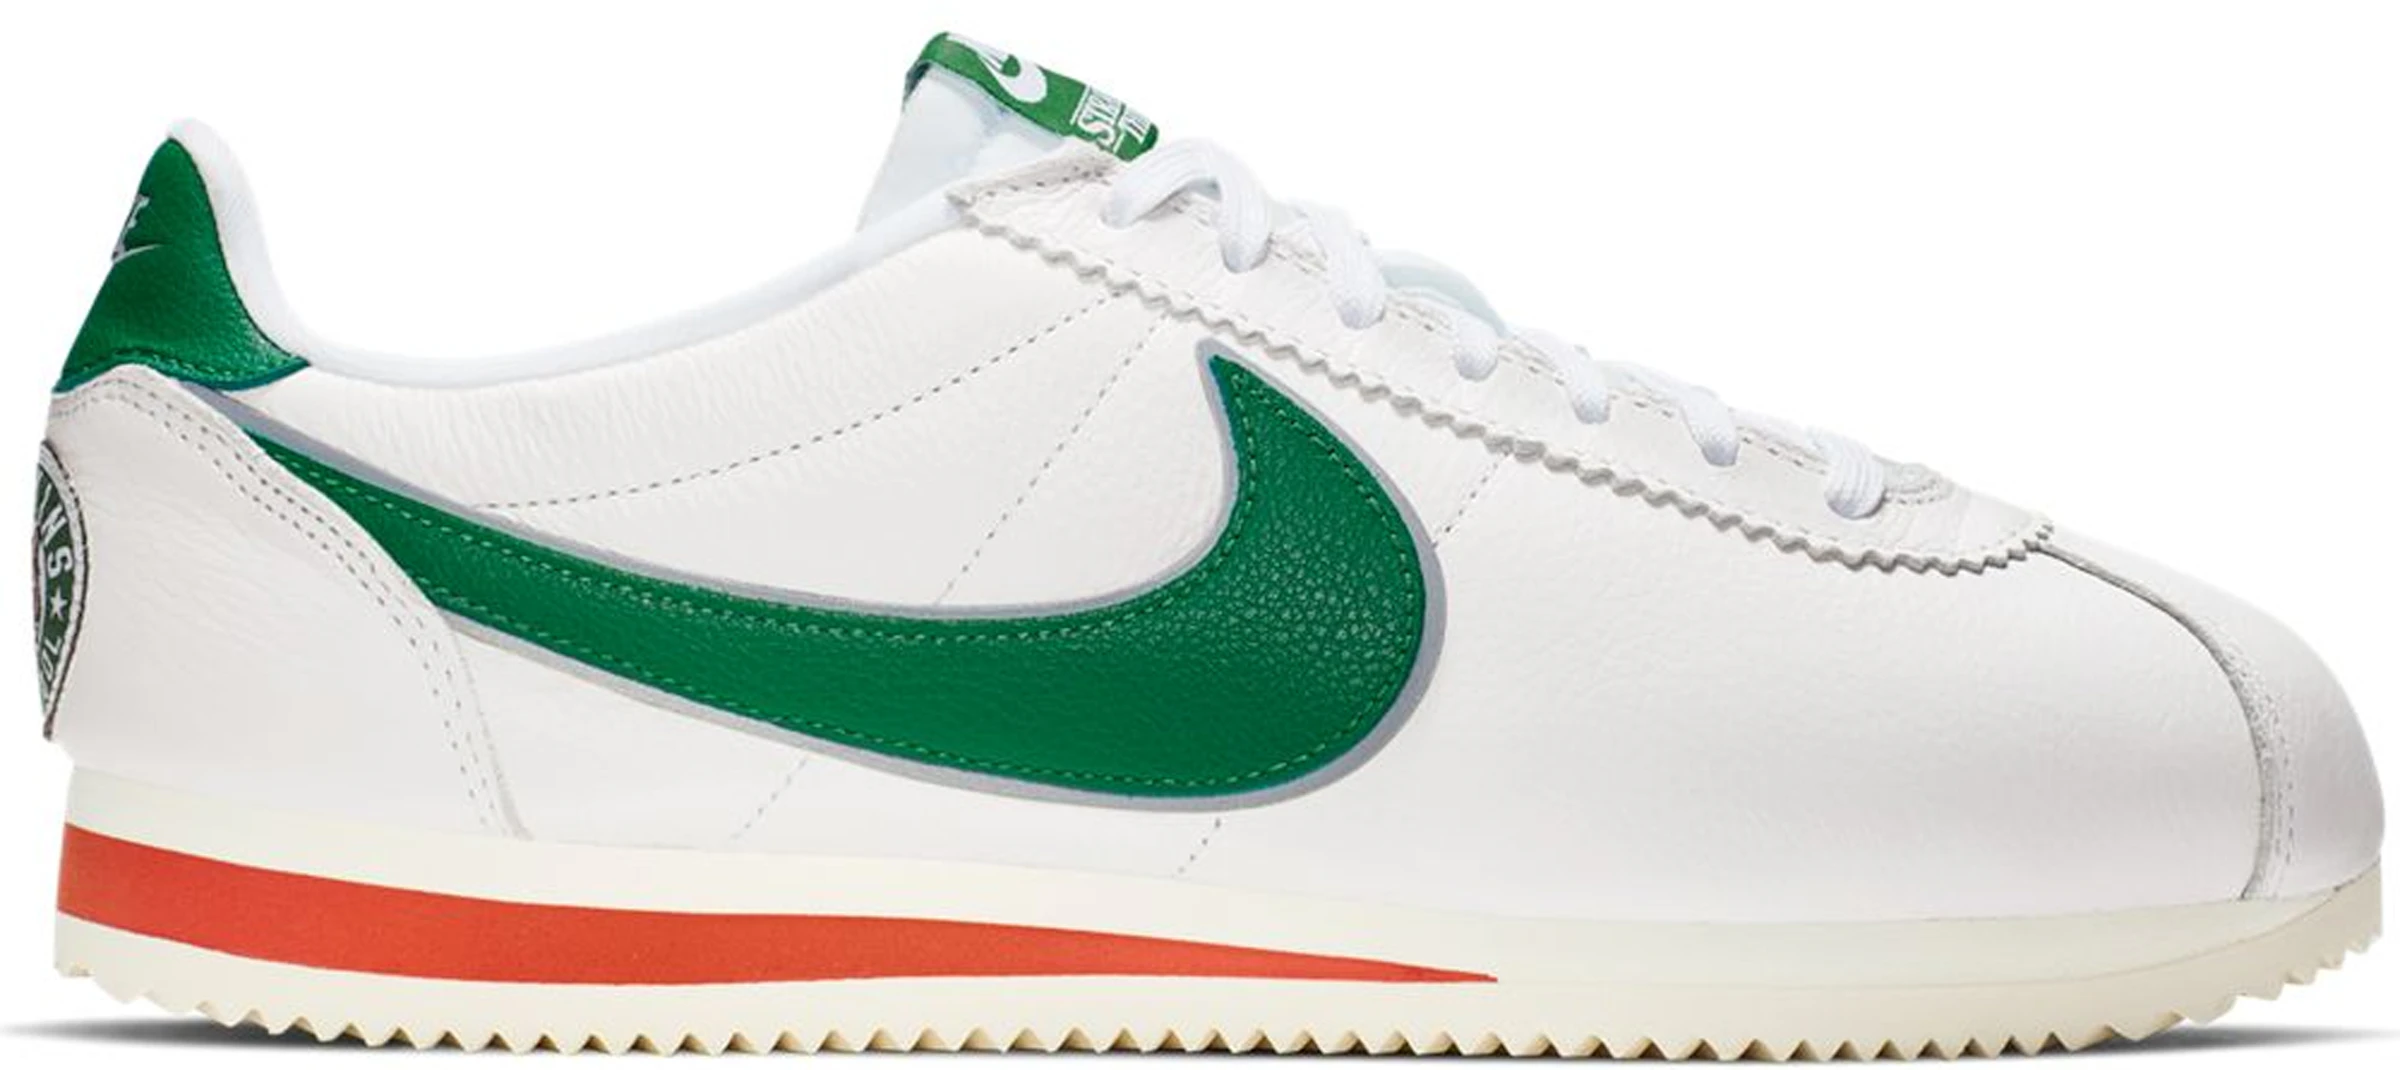 Buy Nike Cortez Shoes & New Sneakers - StockX